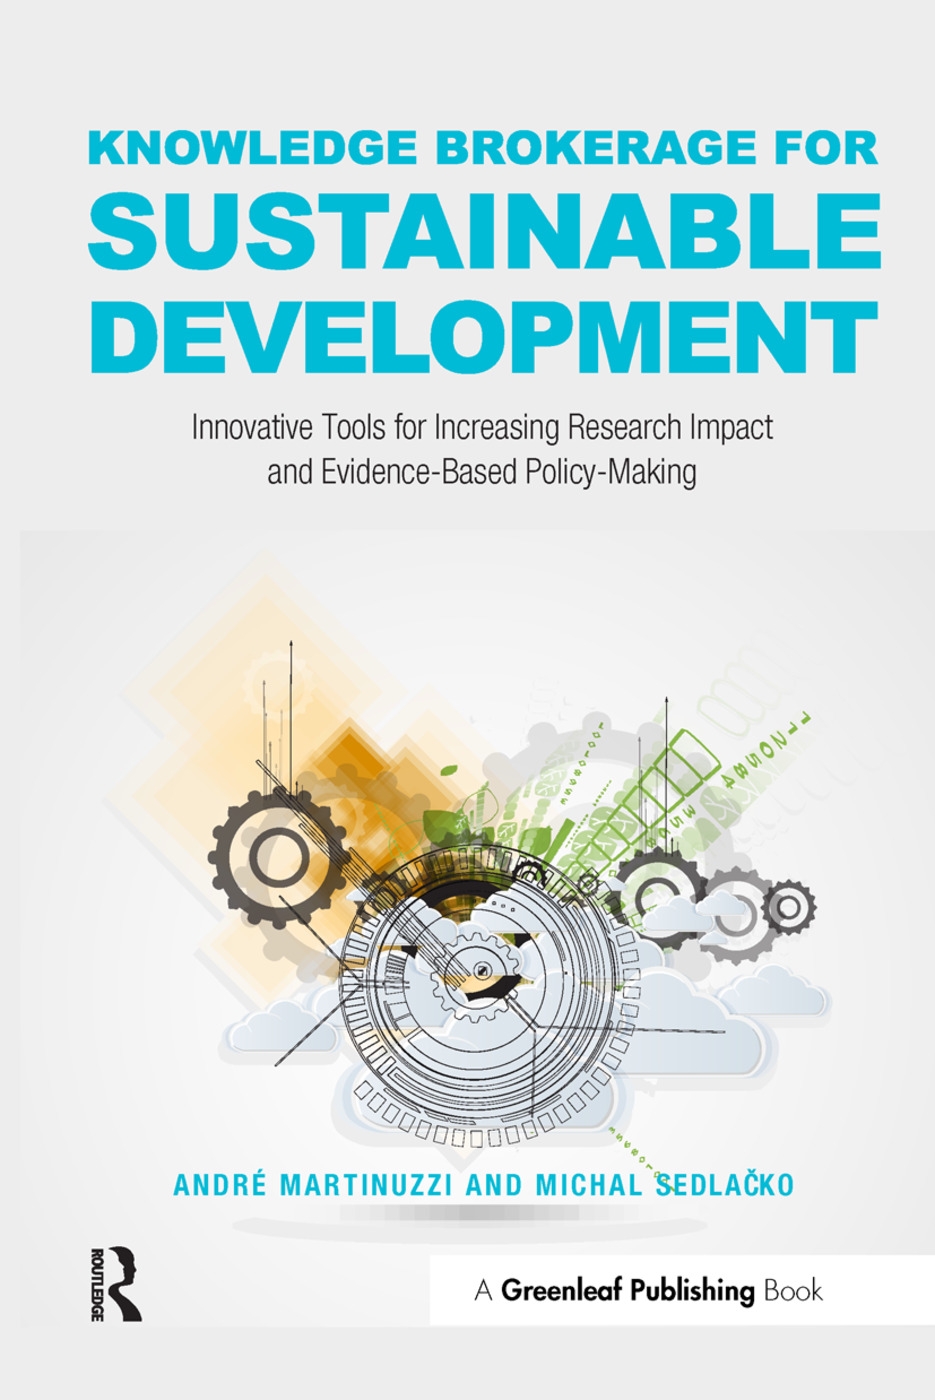 Knowledge Brokerage for Sustainable Development: Innovative Tools for Increasing Research Impact and Evidence-Based Policy Makin